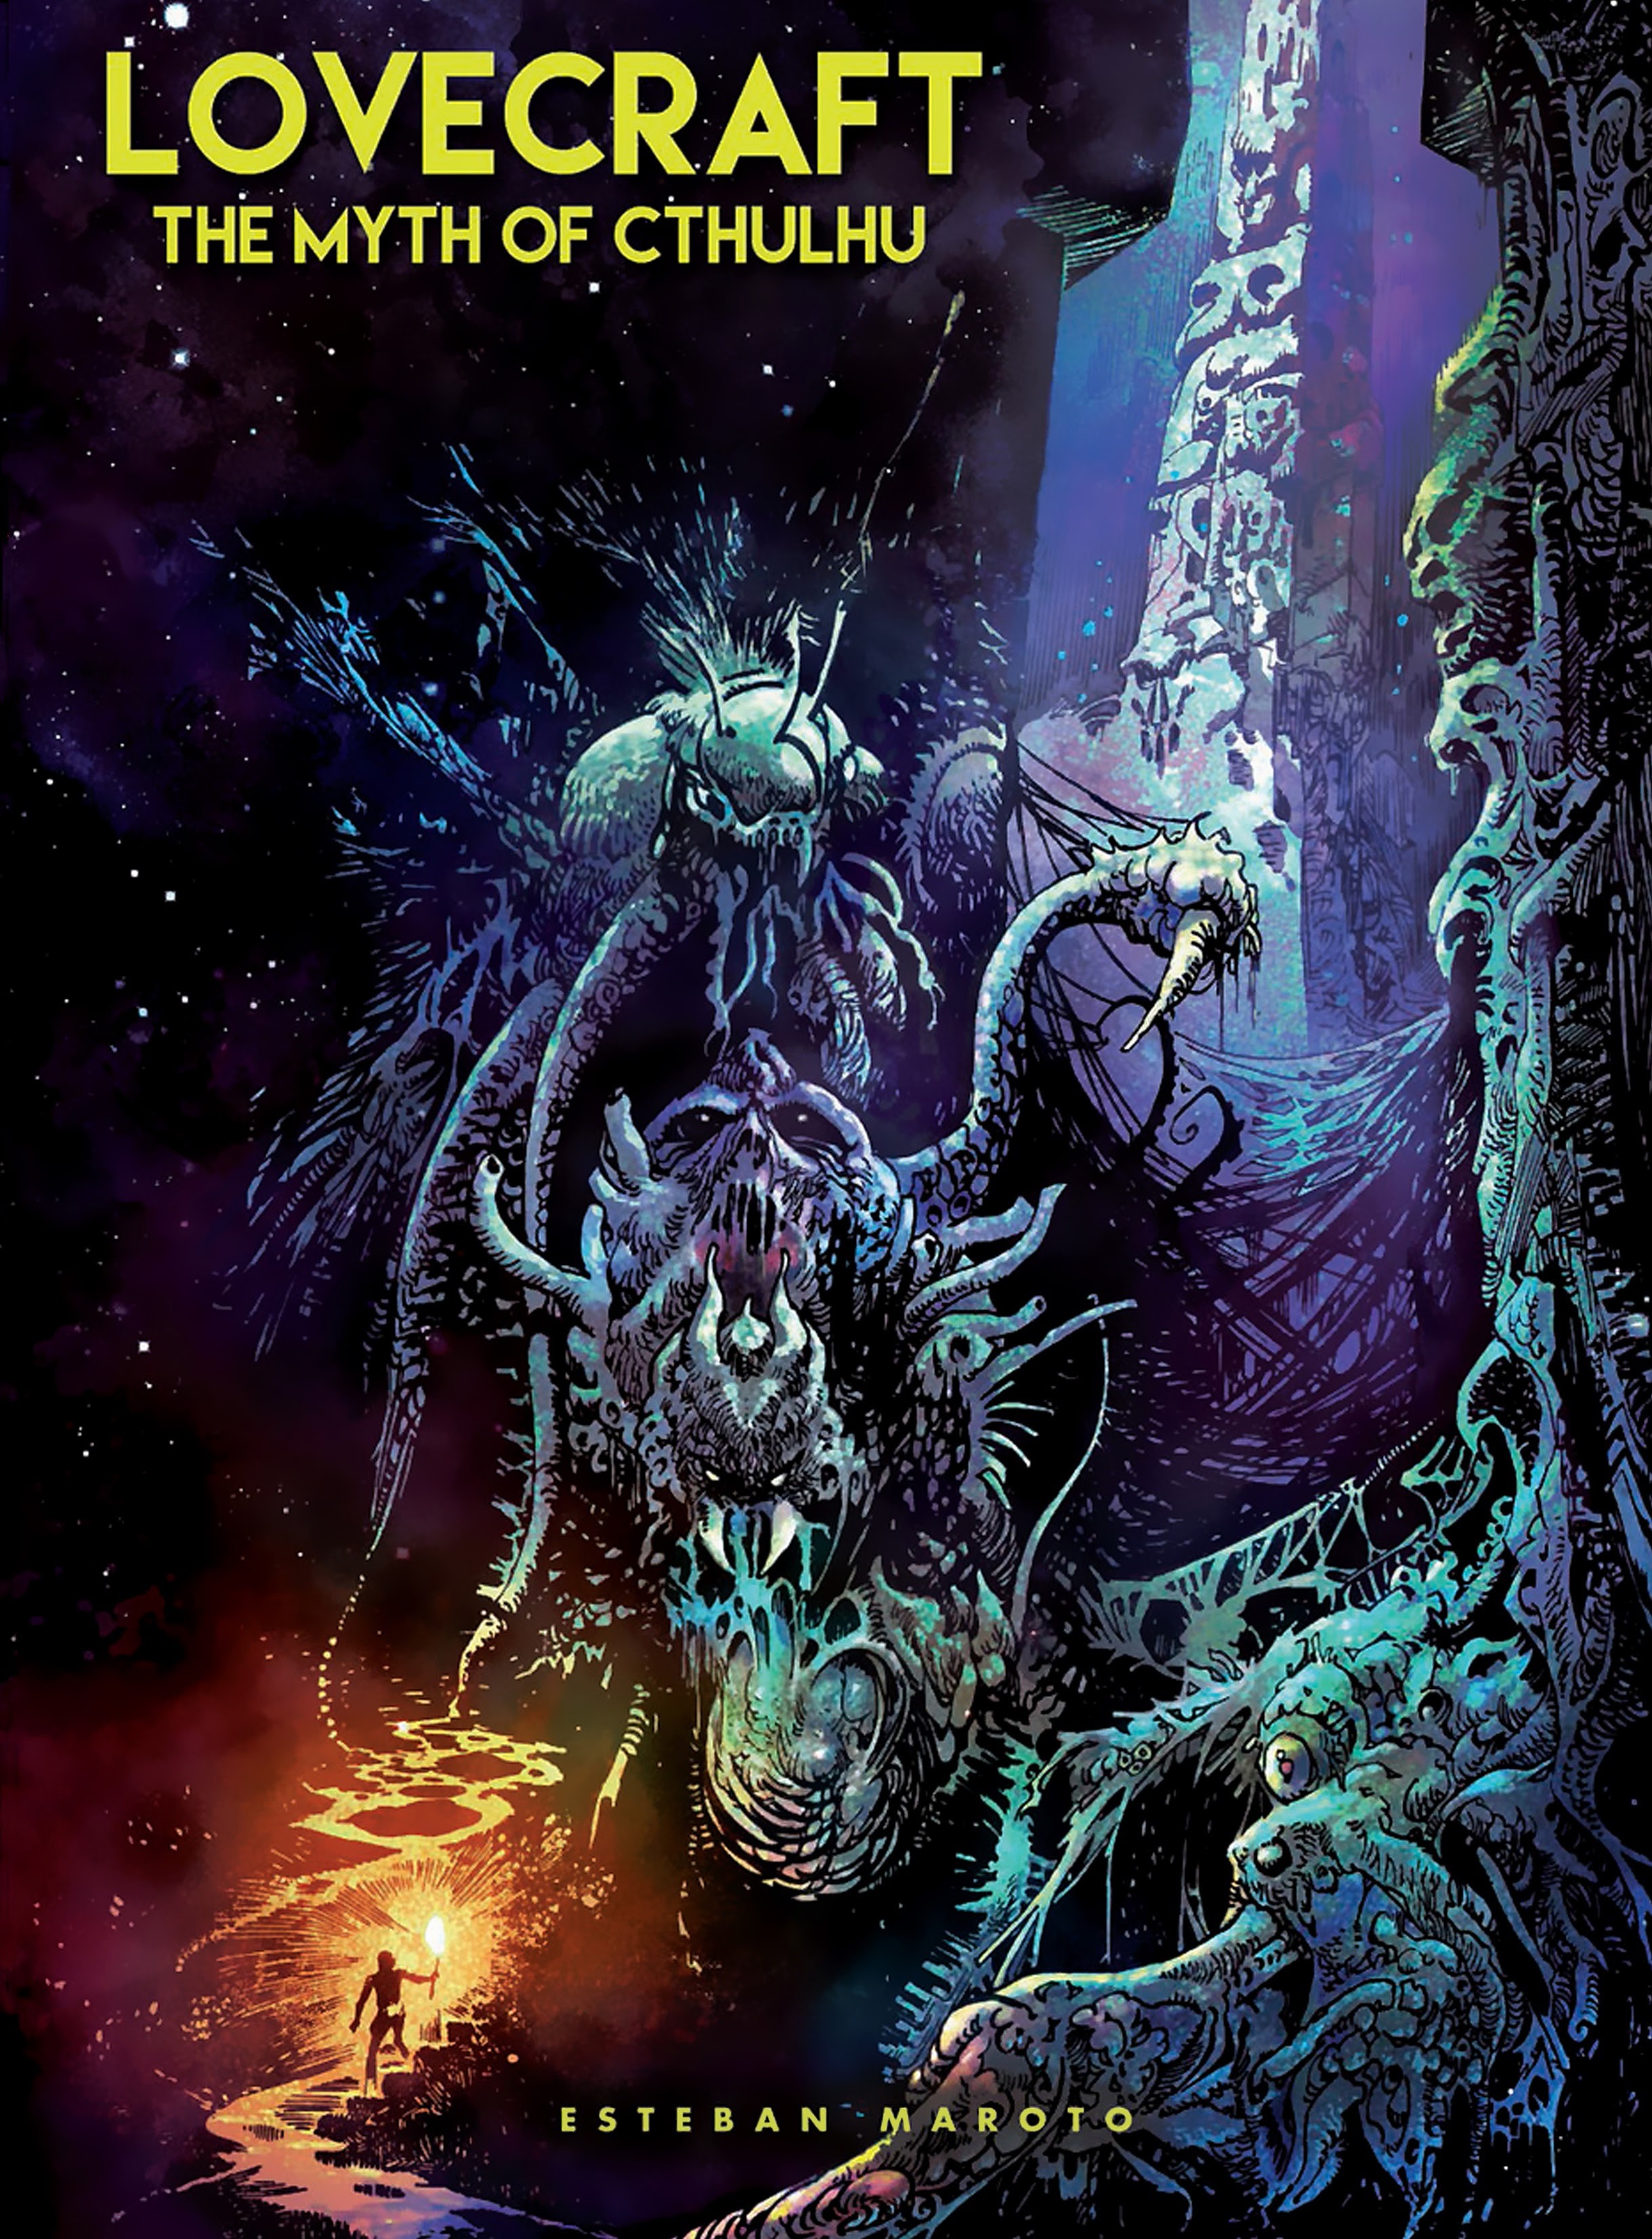 Read online Lovecraft: The Myth of Cthulhu comic -  Issue # TPB - 1